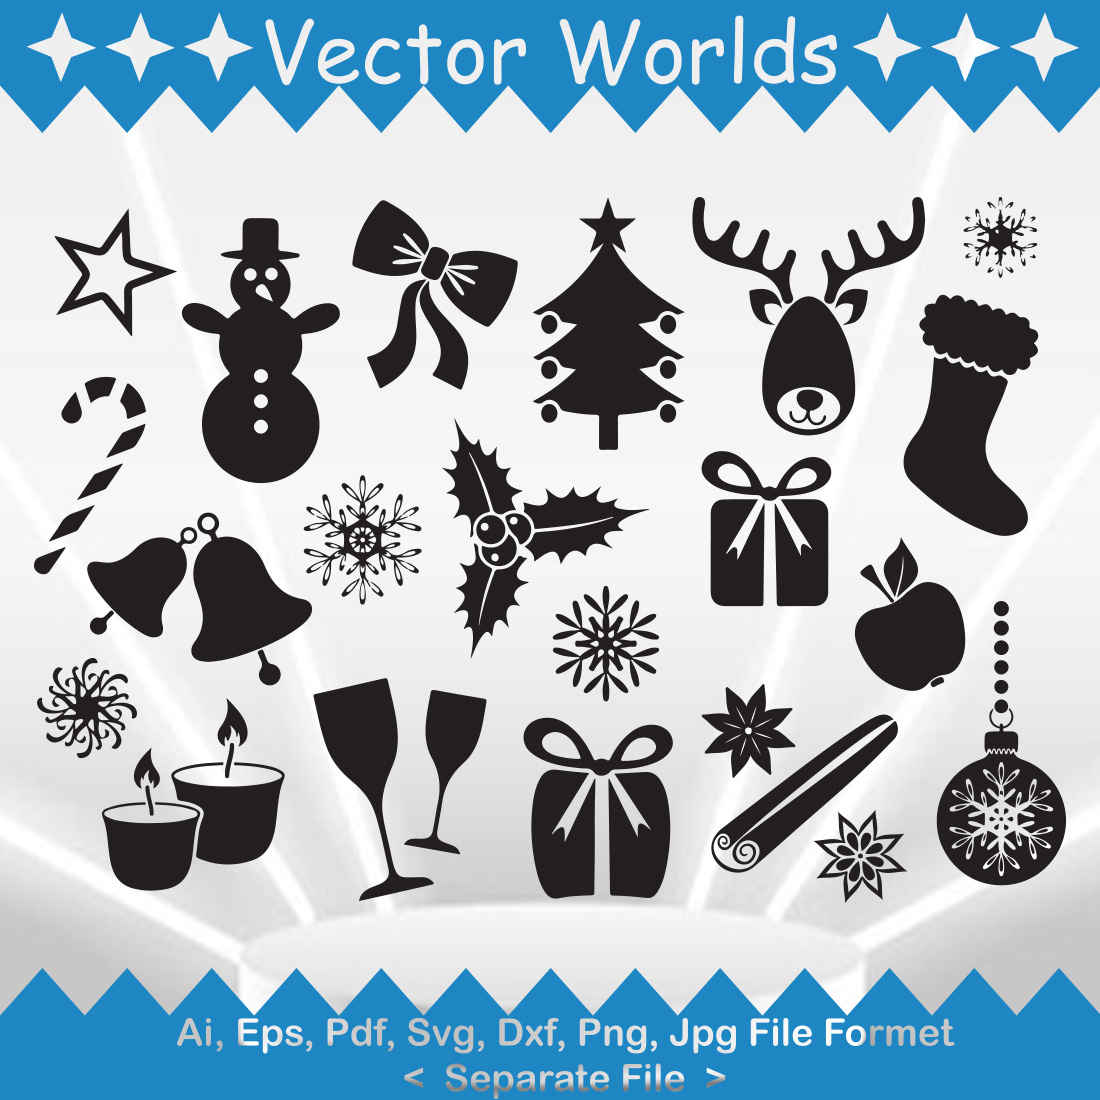 Set of beautiful silhouette vector images of Christmas accessories.